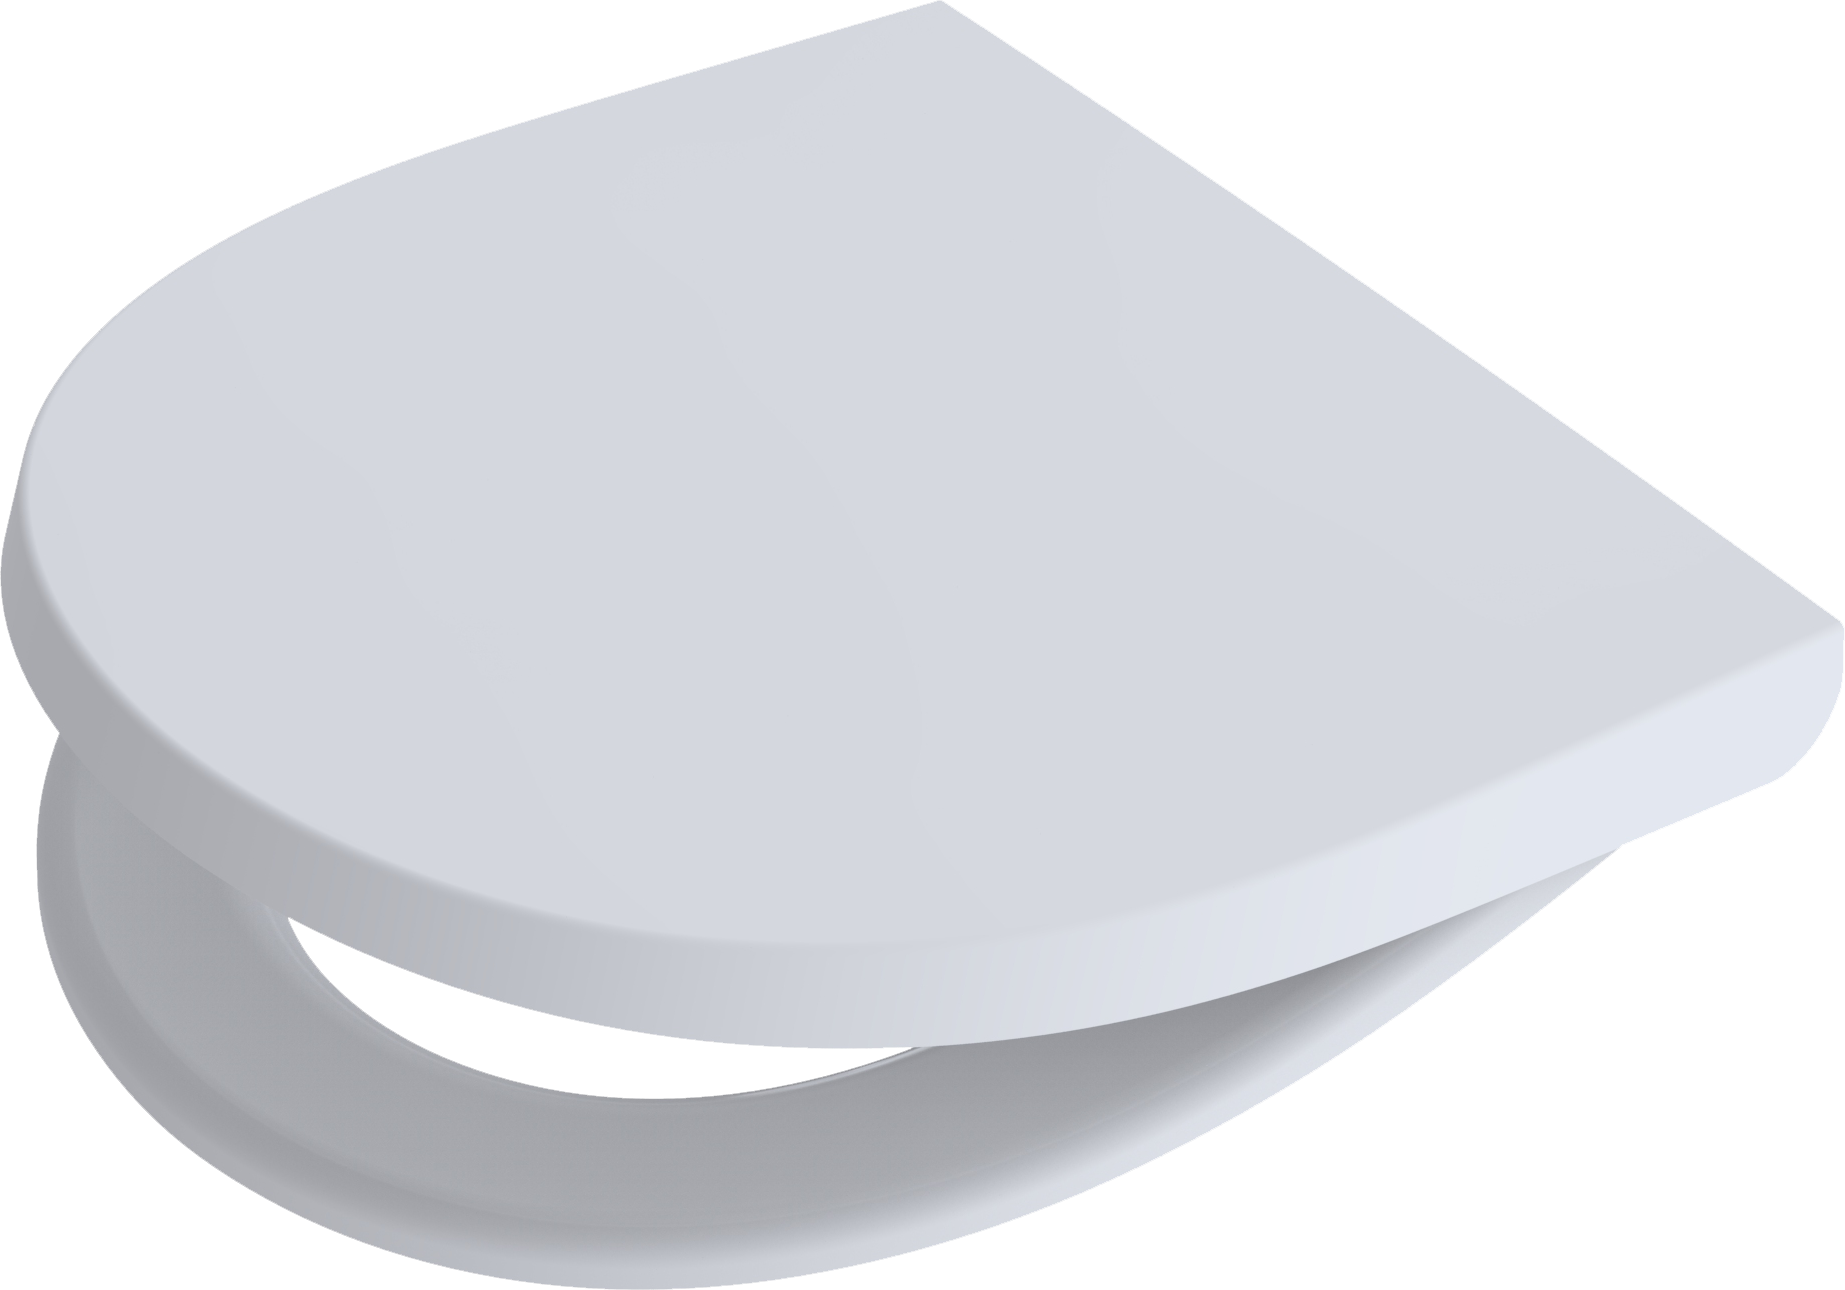 PAGETTE Kadett 300 S toilet seat with integr. soft close, removable with click-o-matic 793884002 white resmi